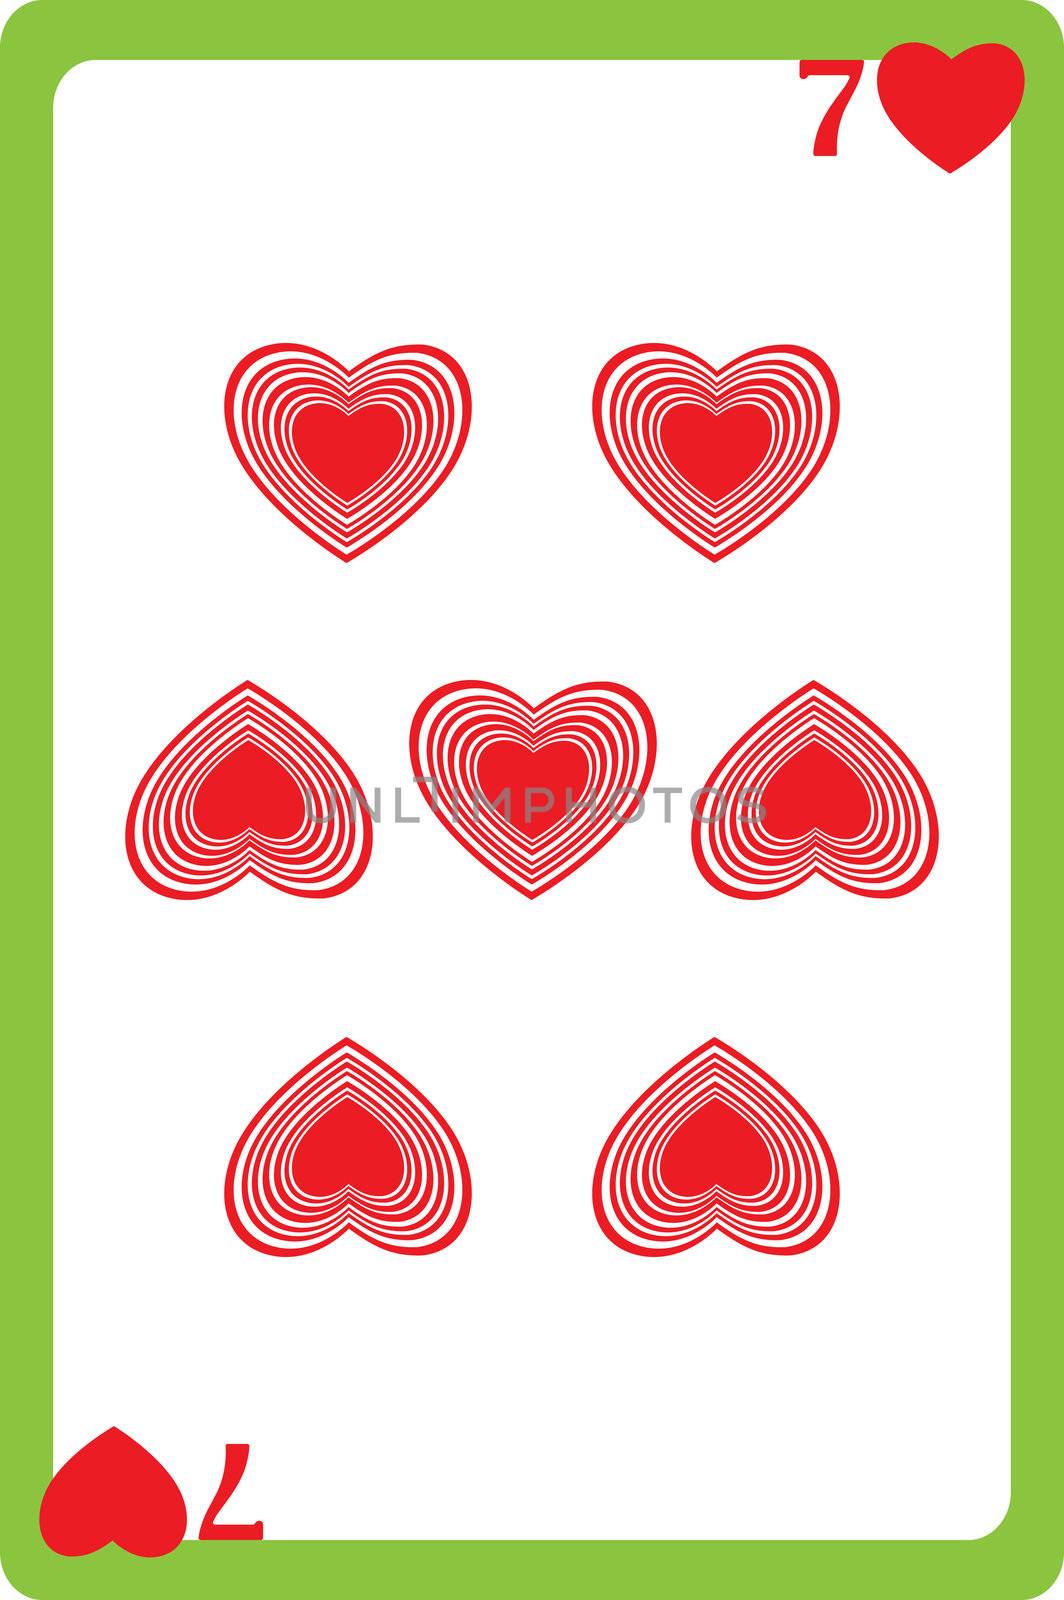 Scale hand drawn illustration of a playing card representing the seven of hearts, one element of a deck